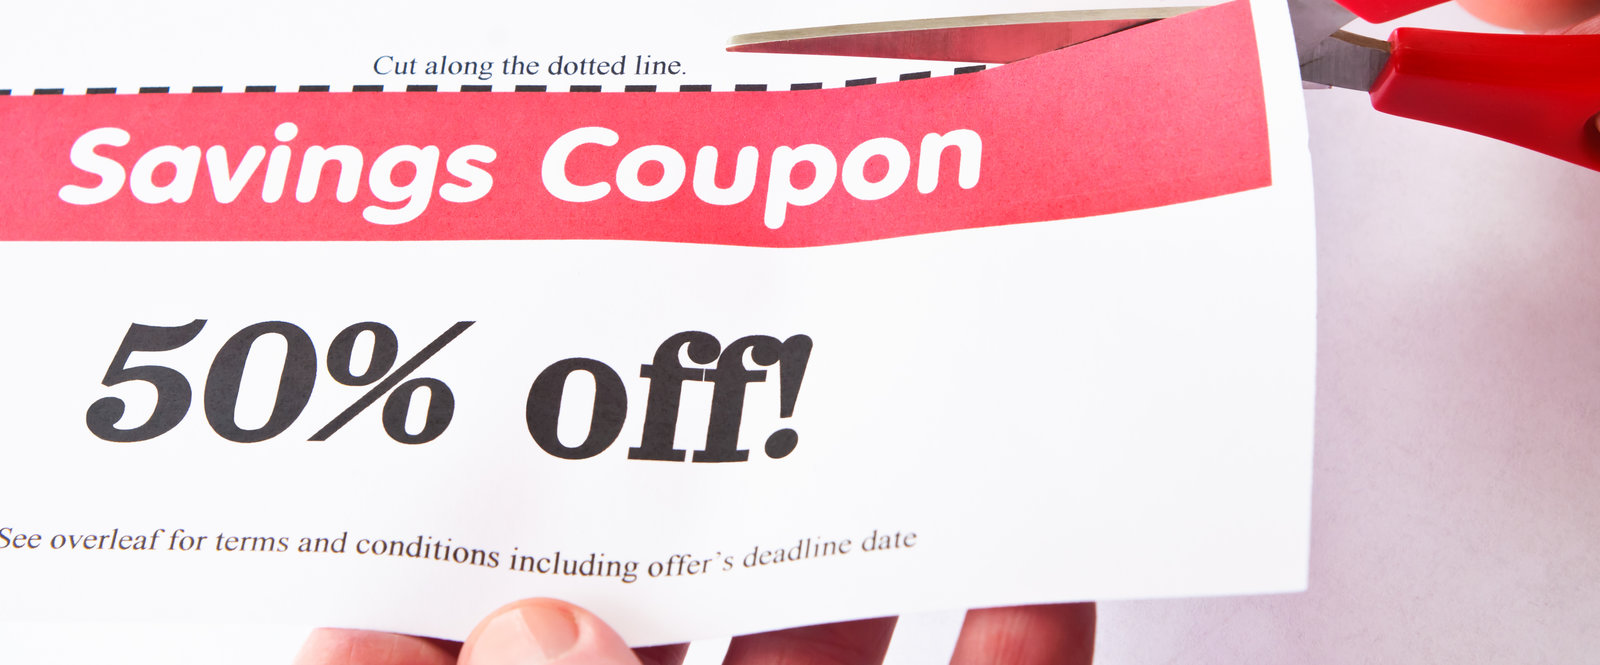 Does Sam's Club Accept Coupons? 